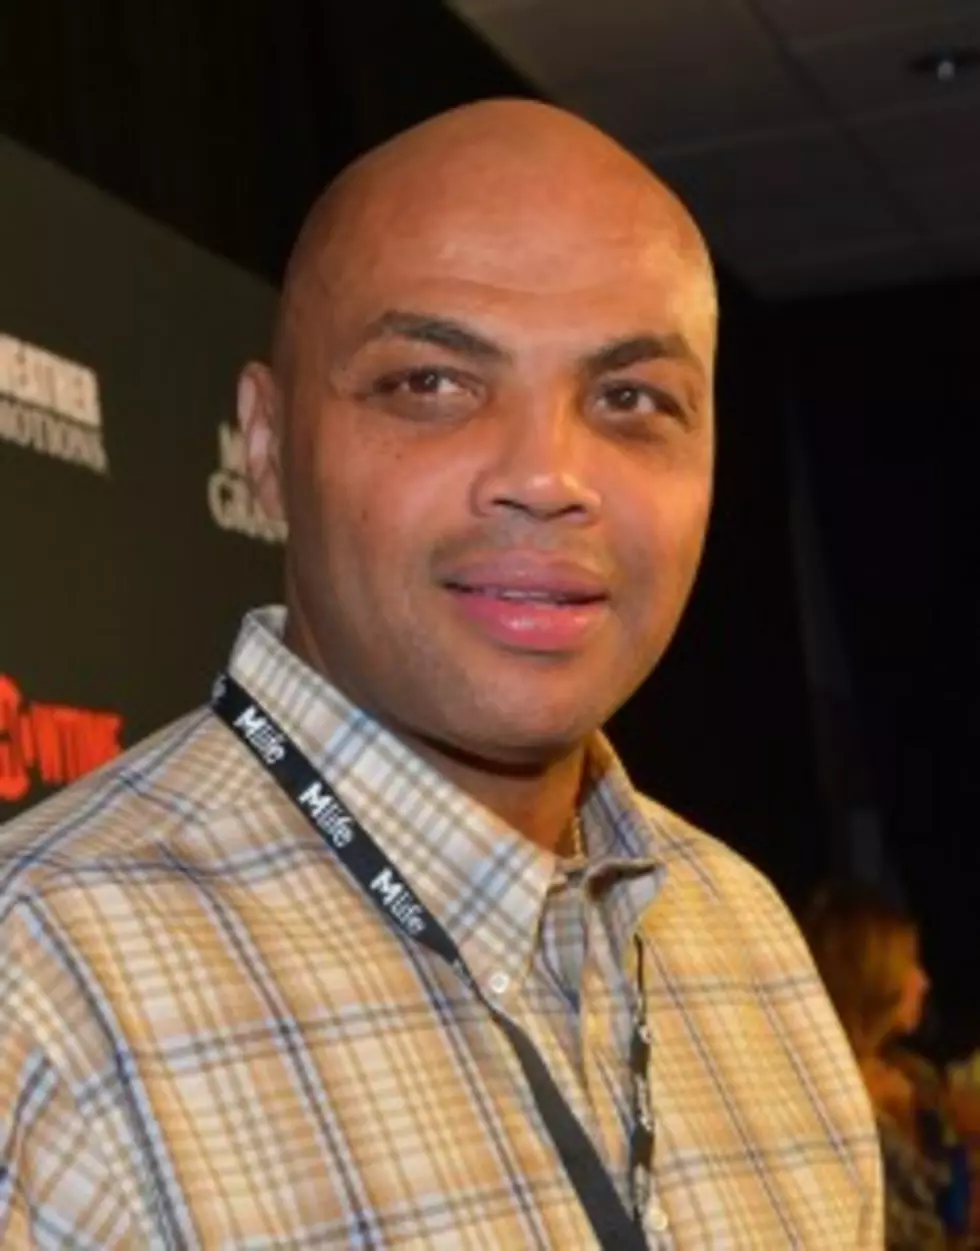 VOTE: Do you agree with Charles Barkley’s opinions on recent events?